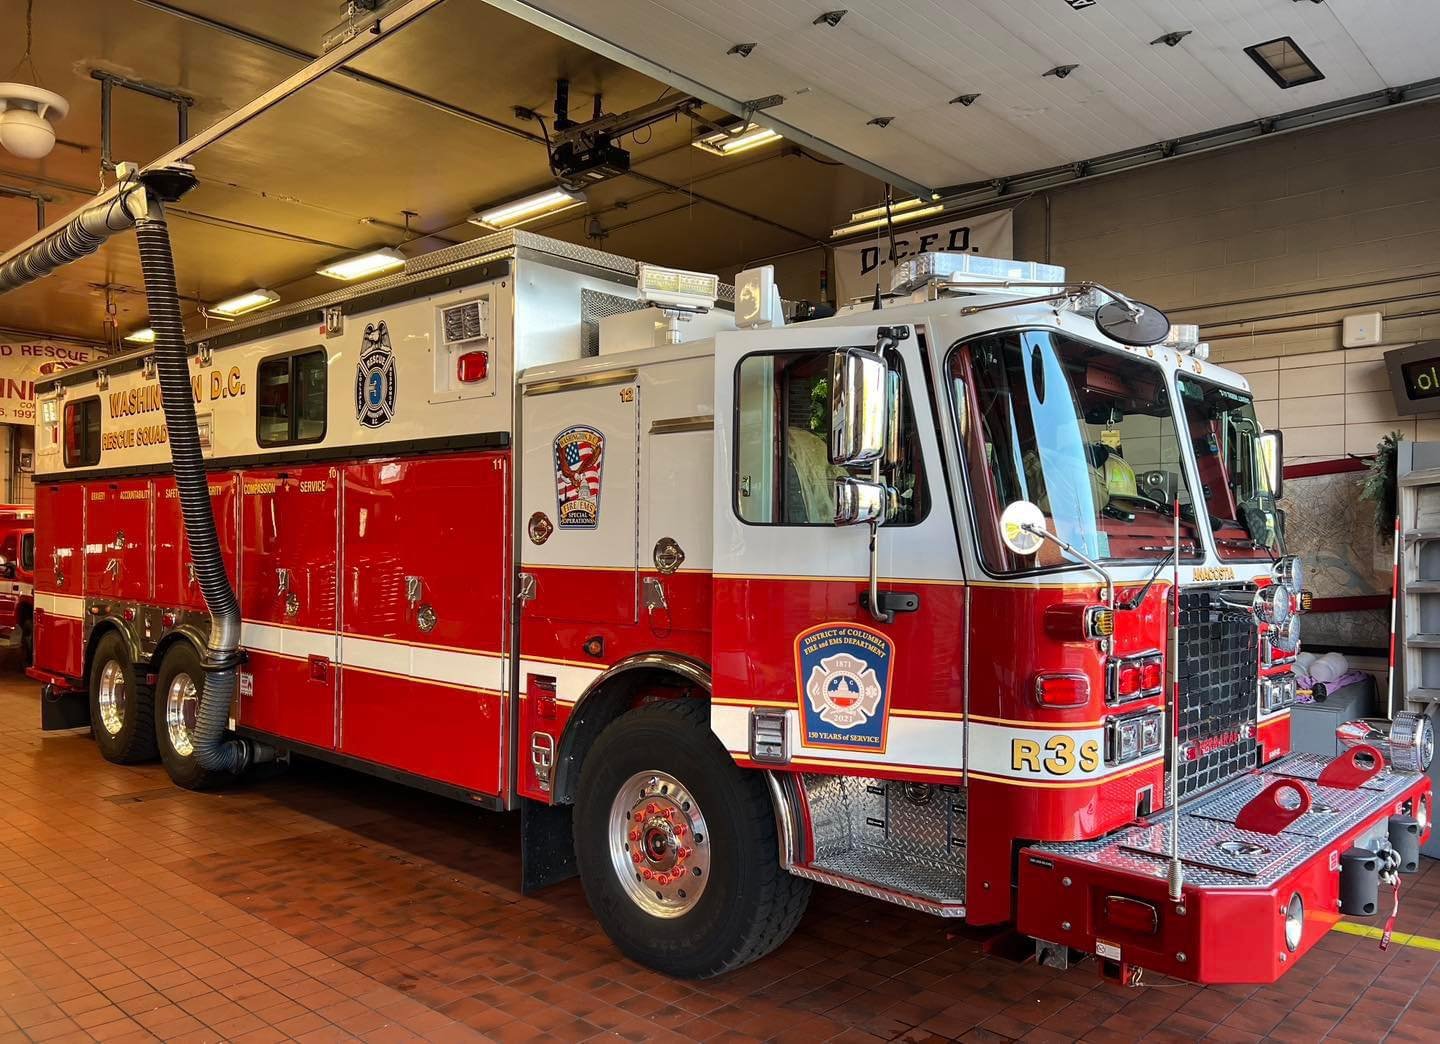 DCFD Rescue 3&rsquo;s brand new Ferrara Fire Apparatus was placed into service earlier this week!! 

@dcfdrescue3 @ferrarafire @fireapparatus @fdicindy 
#washingtondc #dcfd #dcfdrescue3 #jobtown #firetrucksofamerica #ferrarafire #ferrarafireappartus 